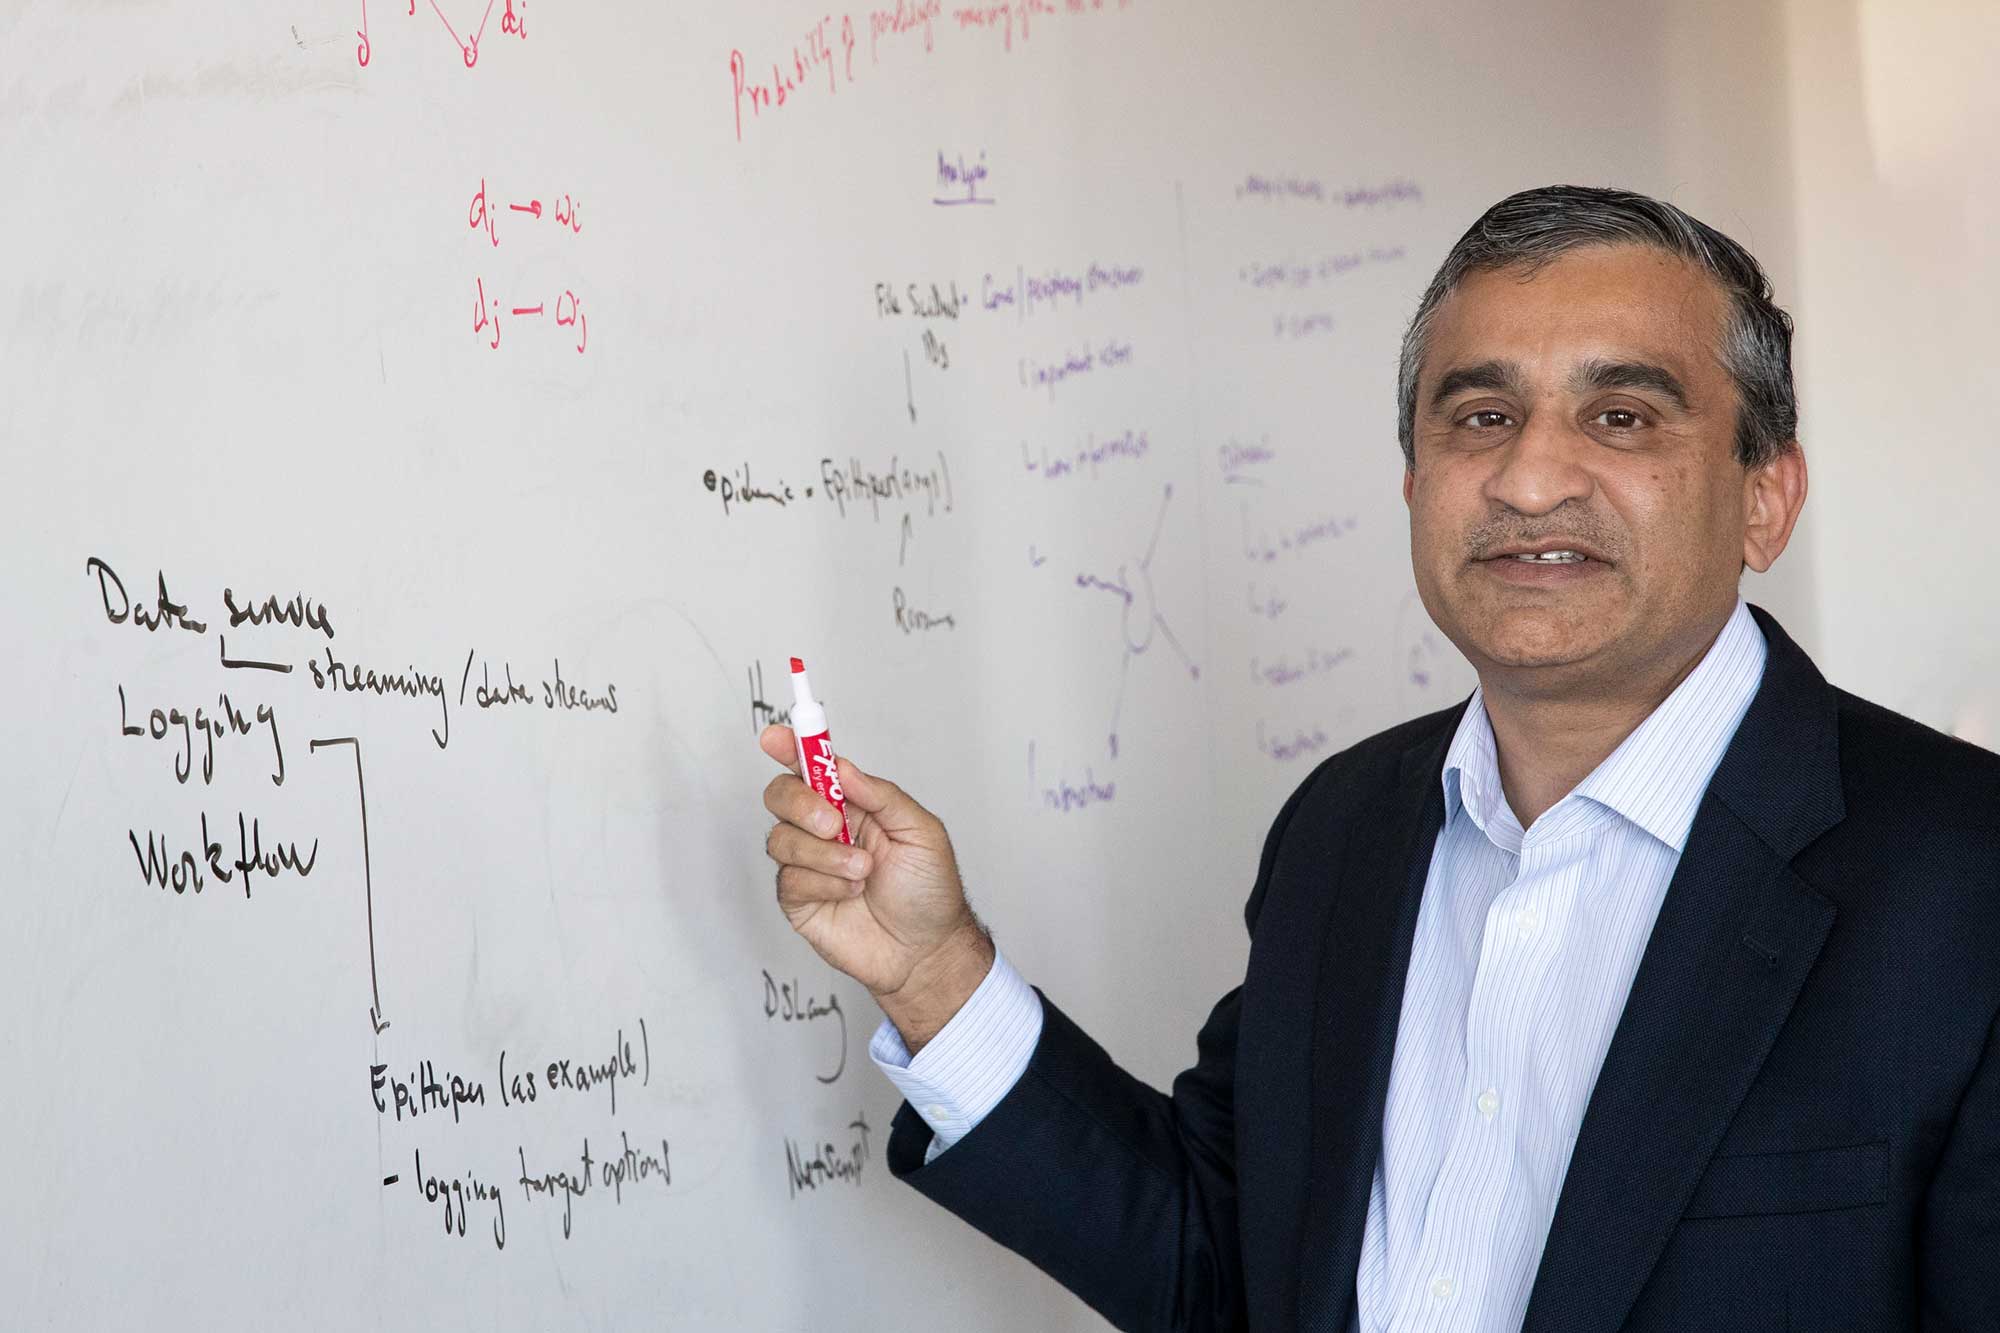 Madhav Marathe standing next to a white board holding a dry erase marker while looking at the camera